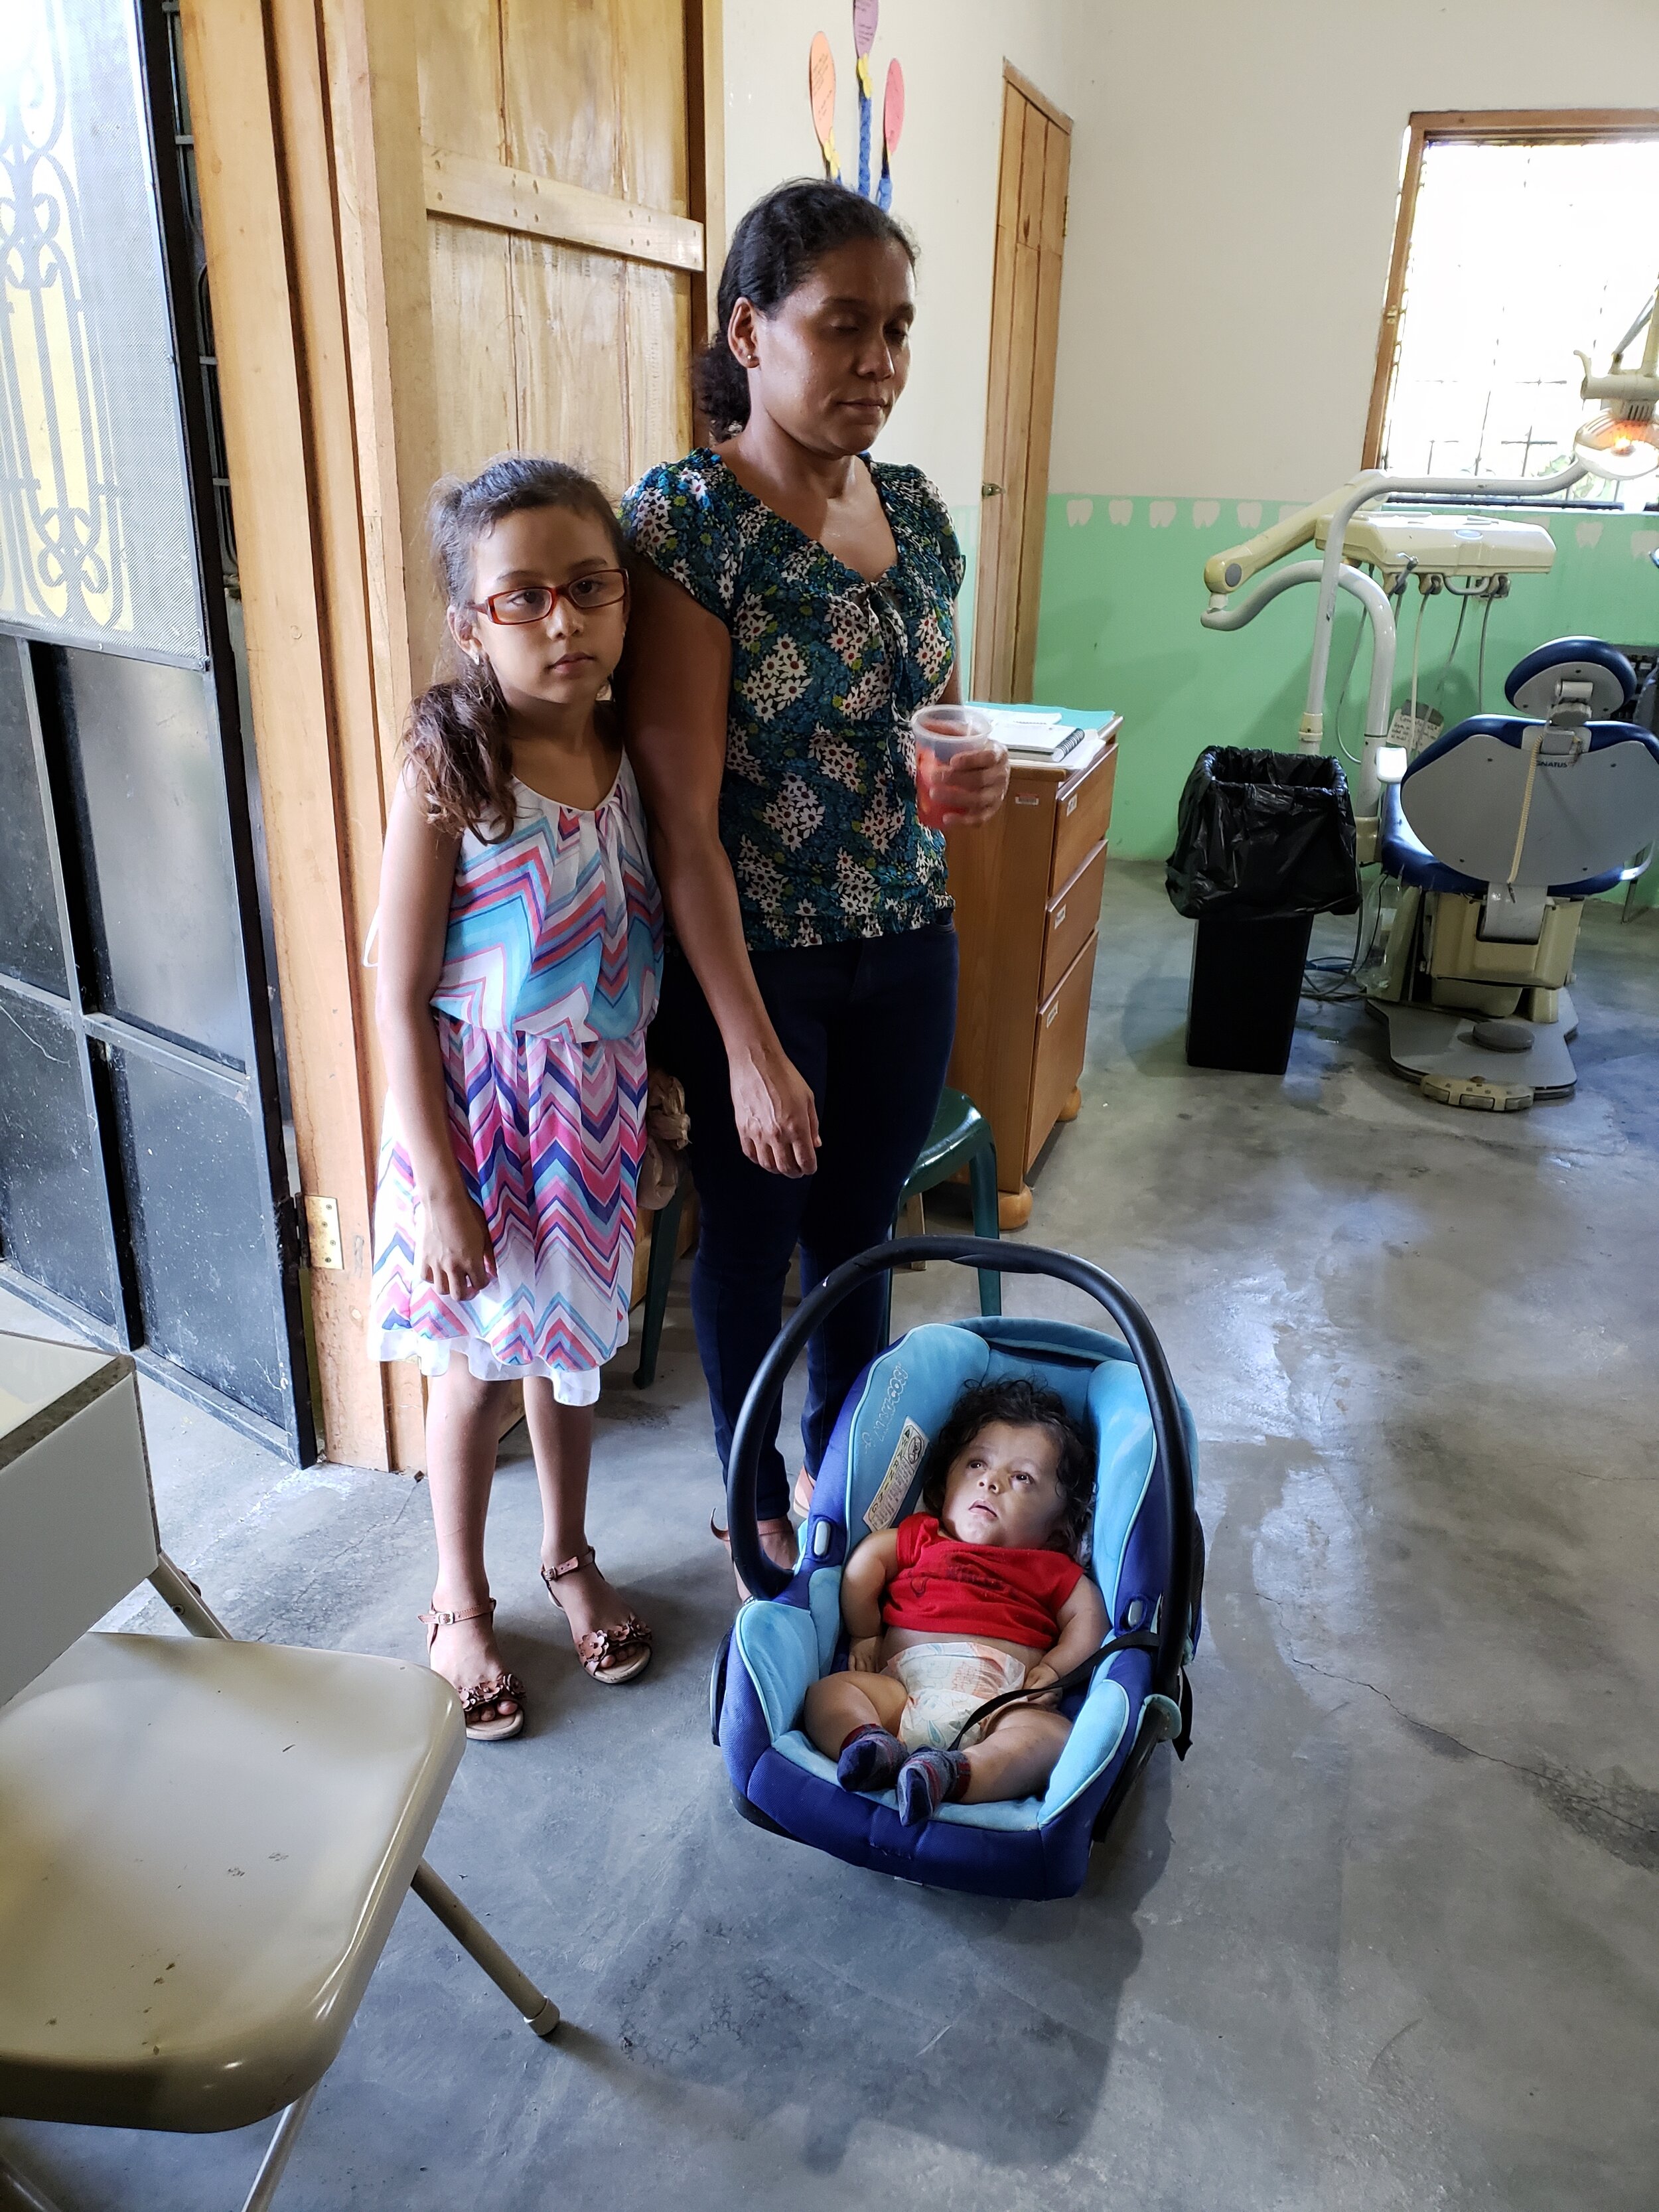 The jornada provided comprehensive screening for over 80 of El Rosario’s youngest children. The infant pictured here was seen with his older sister who had been referred for eyeglasses.